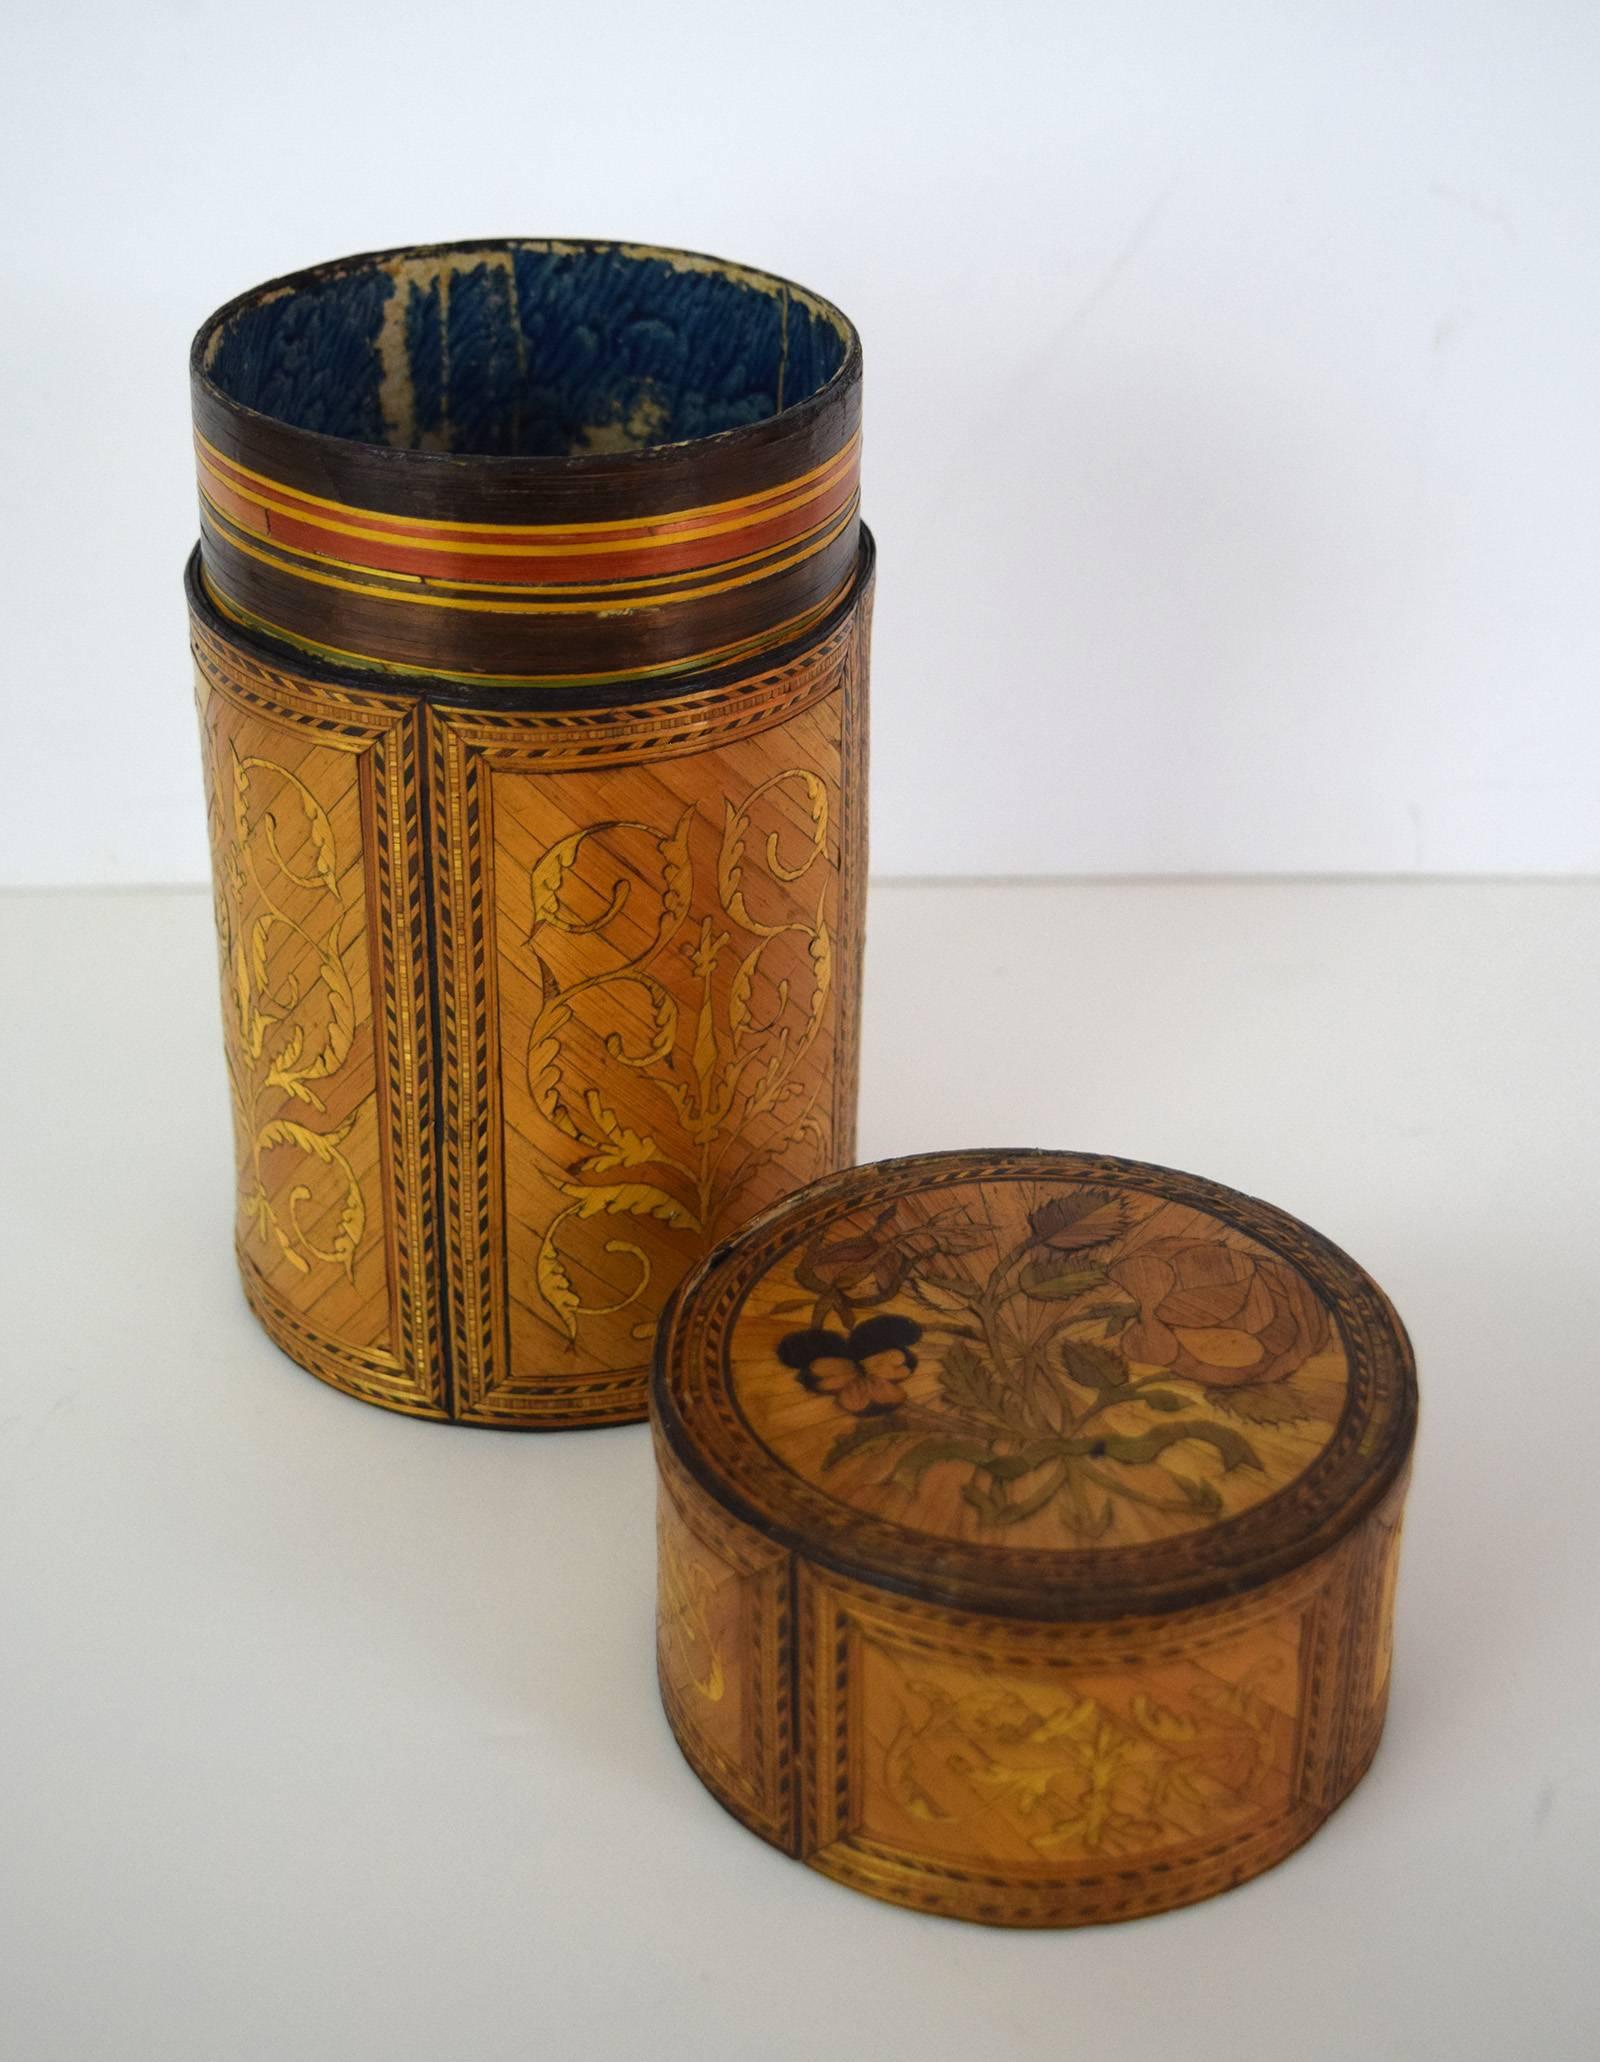 This cylinder box is an exceptionally fine example of straw marquetry, and a rare survivor of the craft, which involves the cutting, coloring, and mounting of split straws to form decorative patterns.  The craft flourished in what would have been